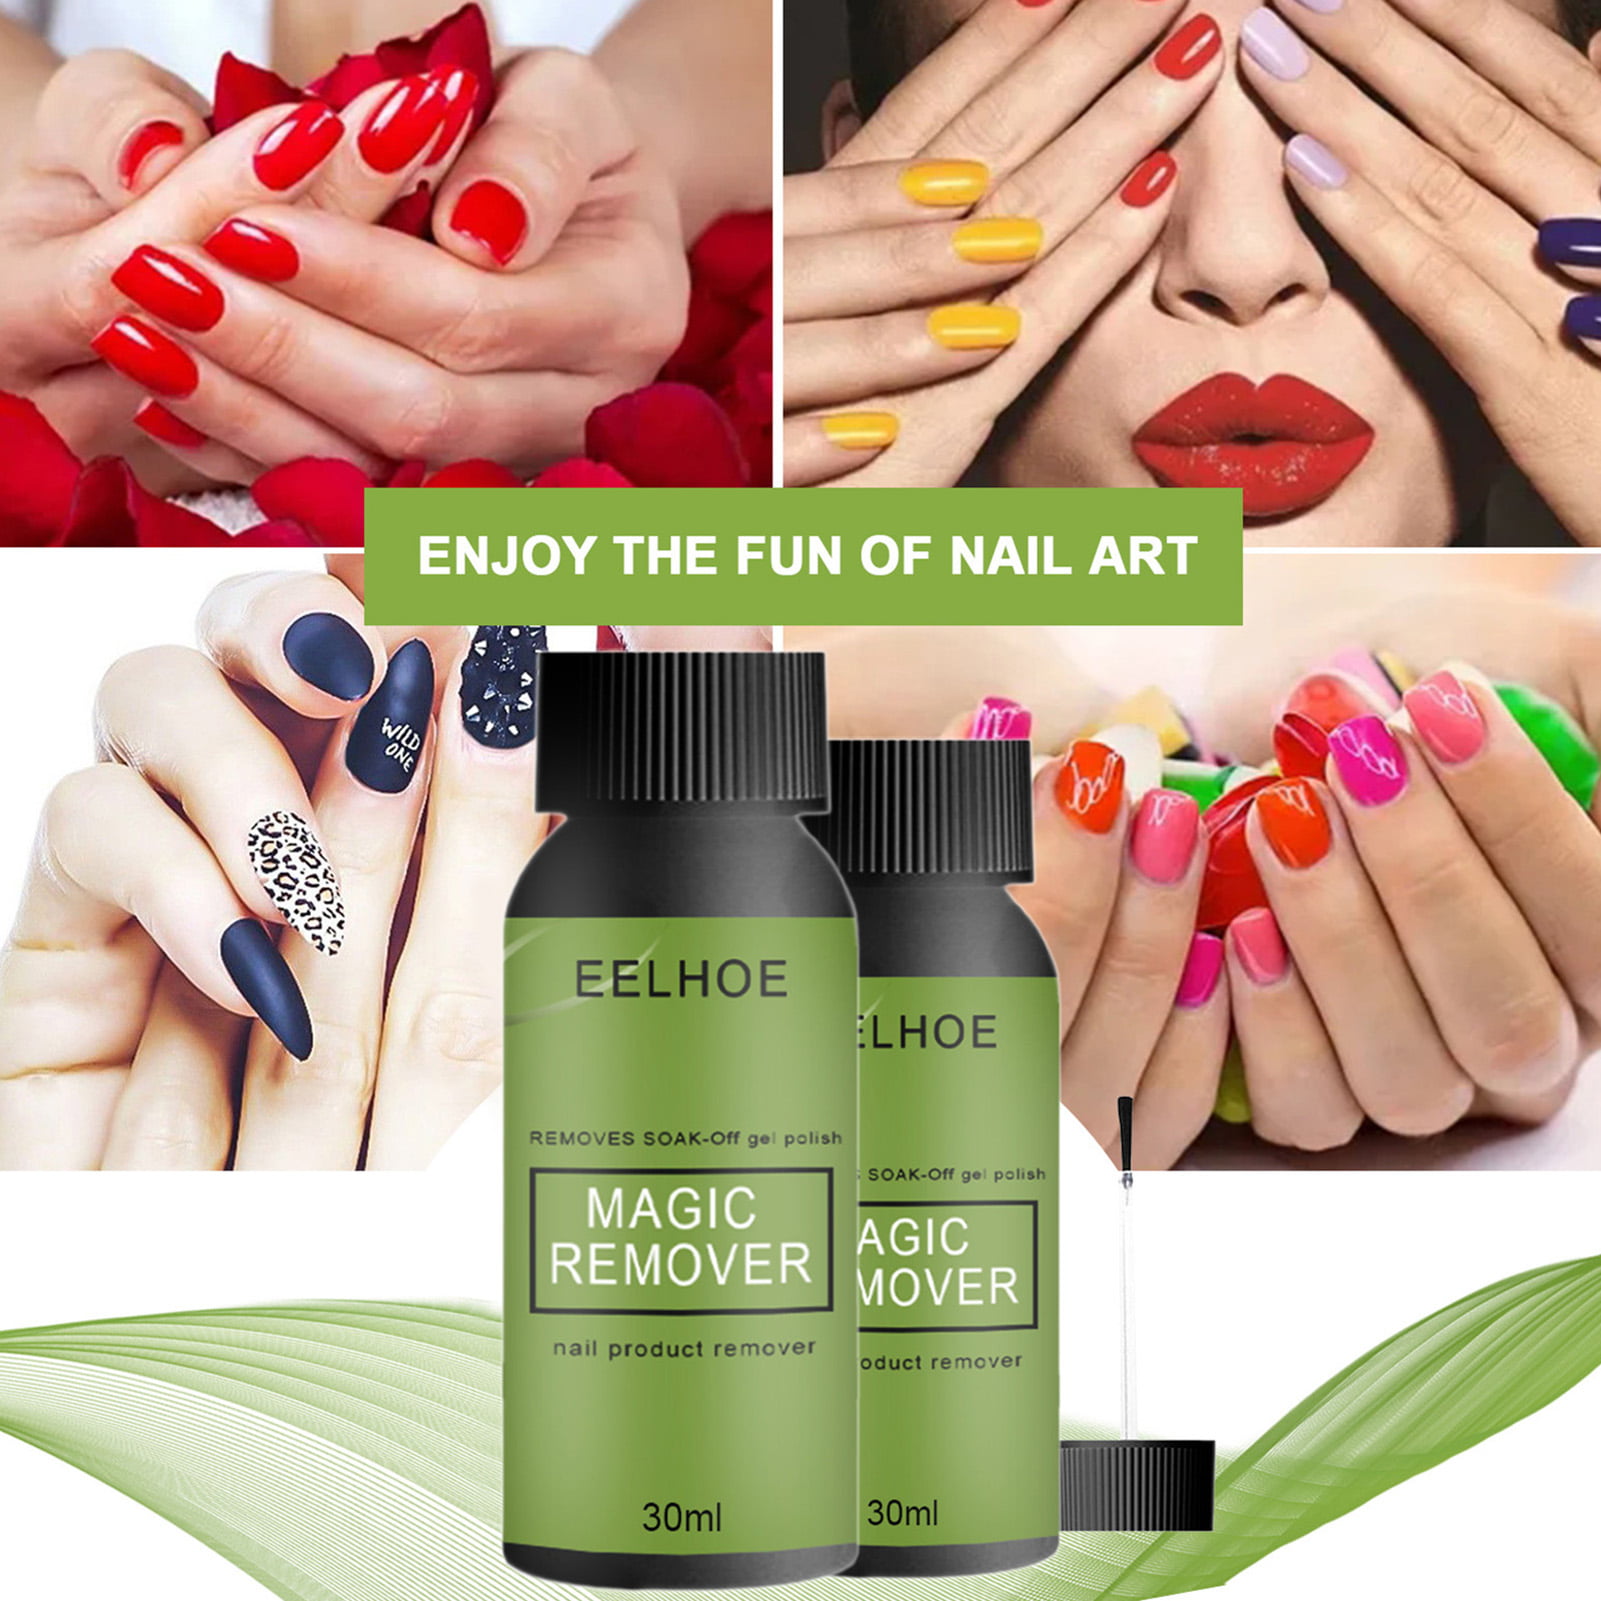 Which Nail Varnish Is Non-Toxic and Healthy? - Bunny Brewer